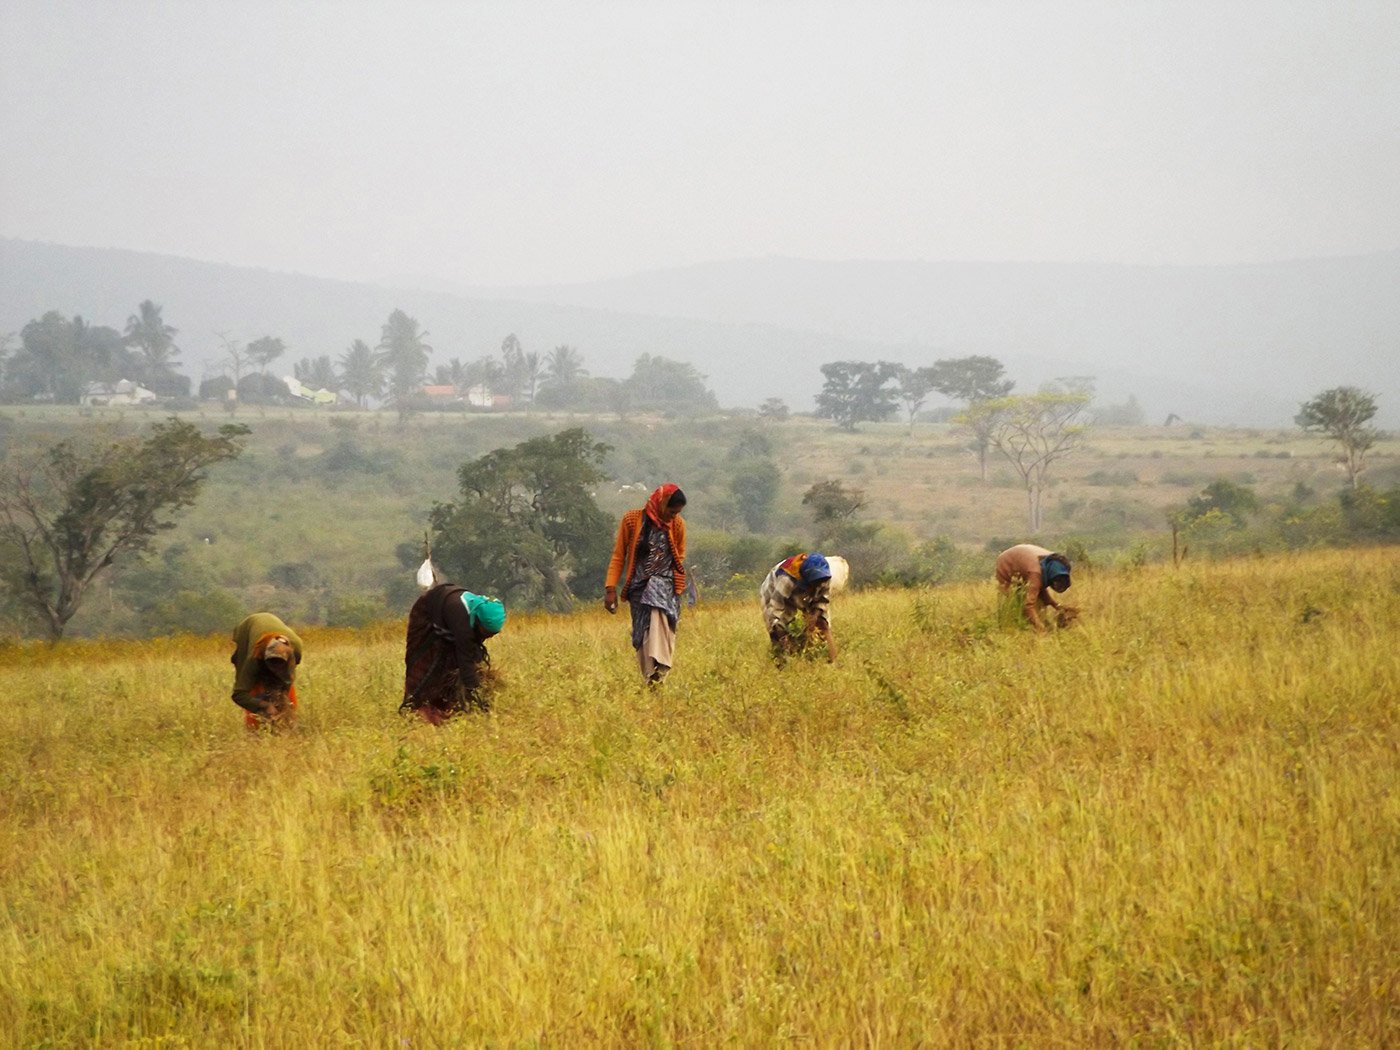 Women at work in the fields